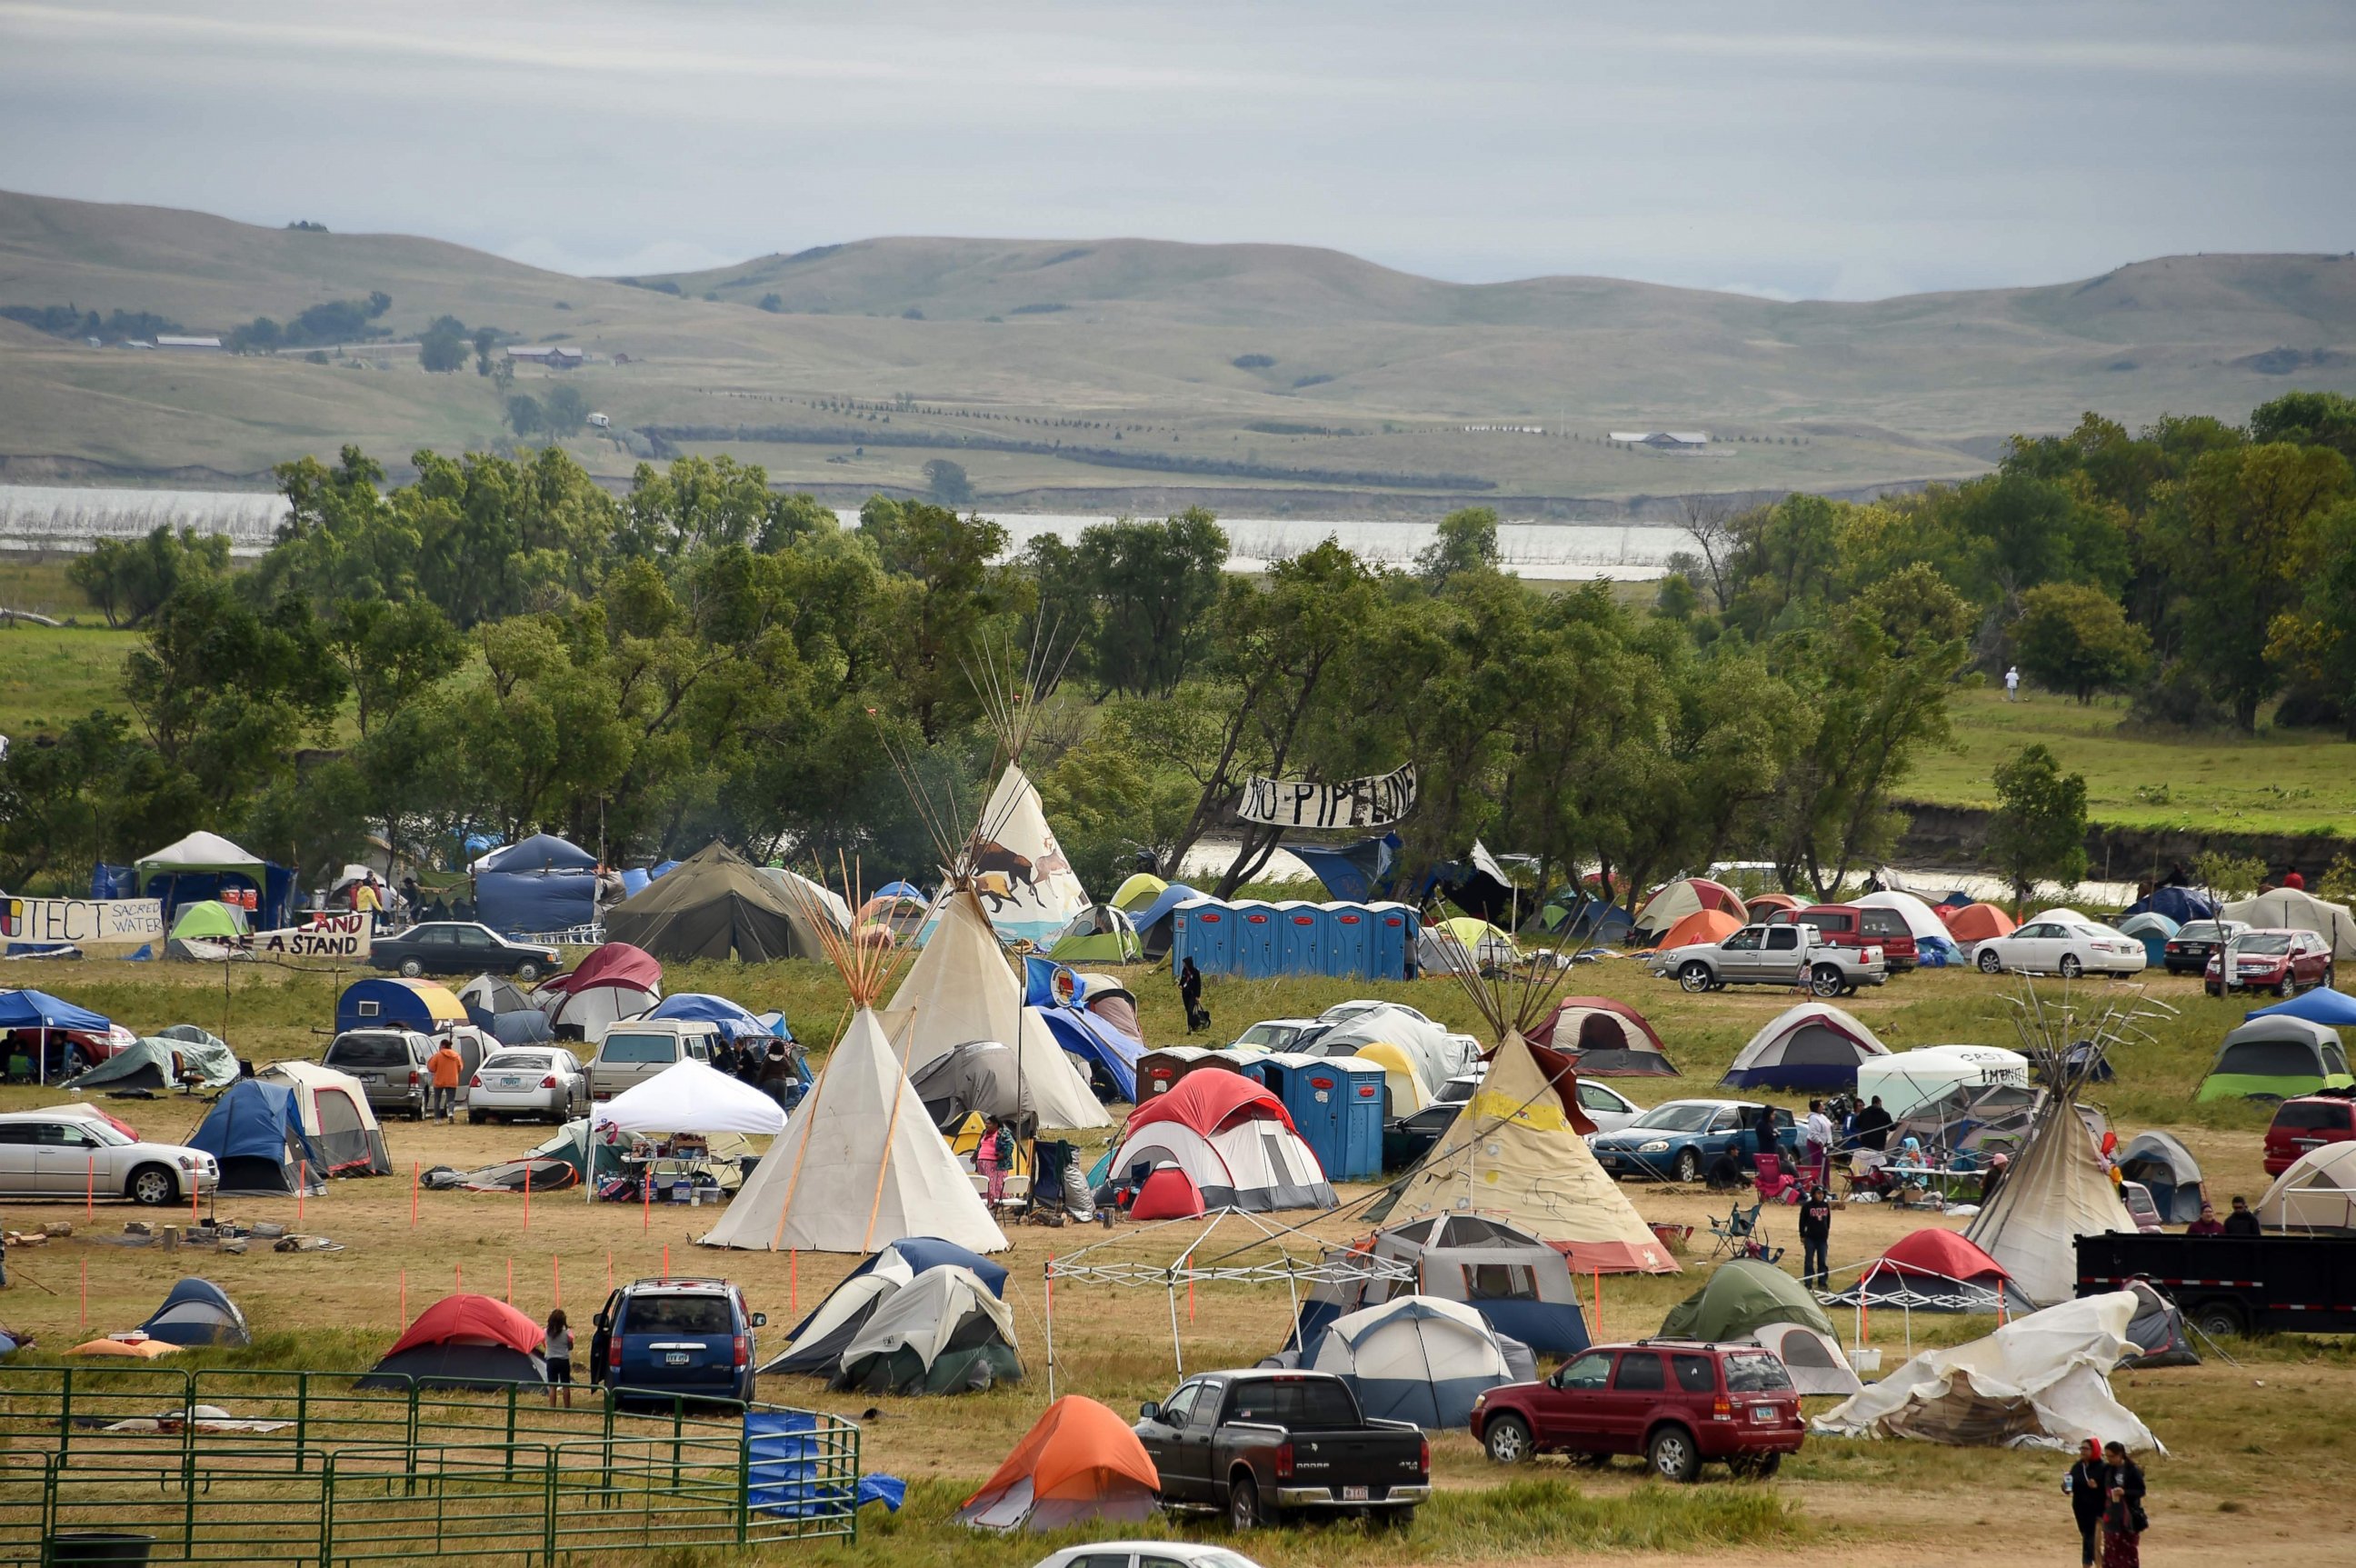 PHOTO: The Missouri River is seen beyond an encampment Sept. 4, 2016, near Cannon Ball, North Dakota where hundreds of people have gathered to join the Standing Rock Sioux Tribe's protest of the Dakota Access Pipeline (DAPL).